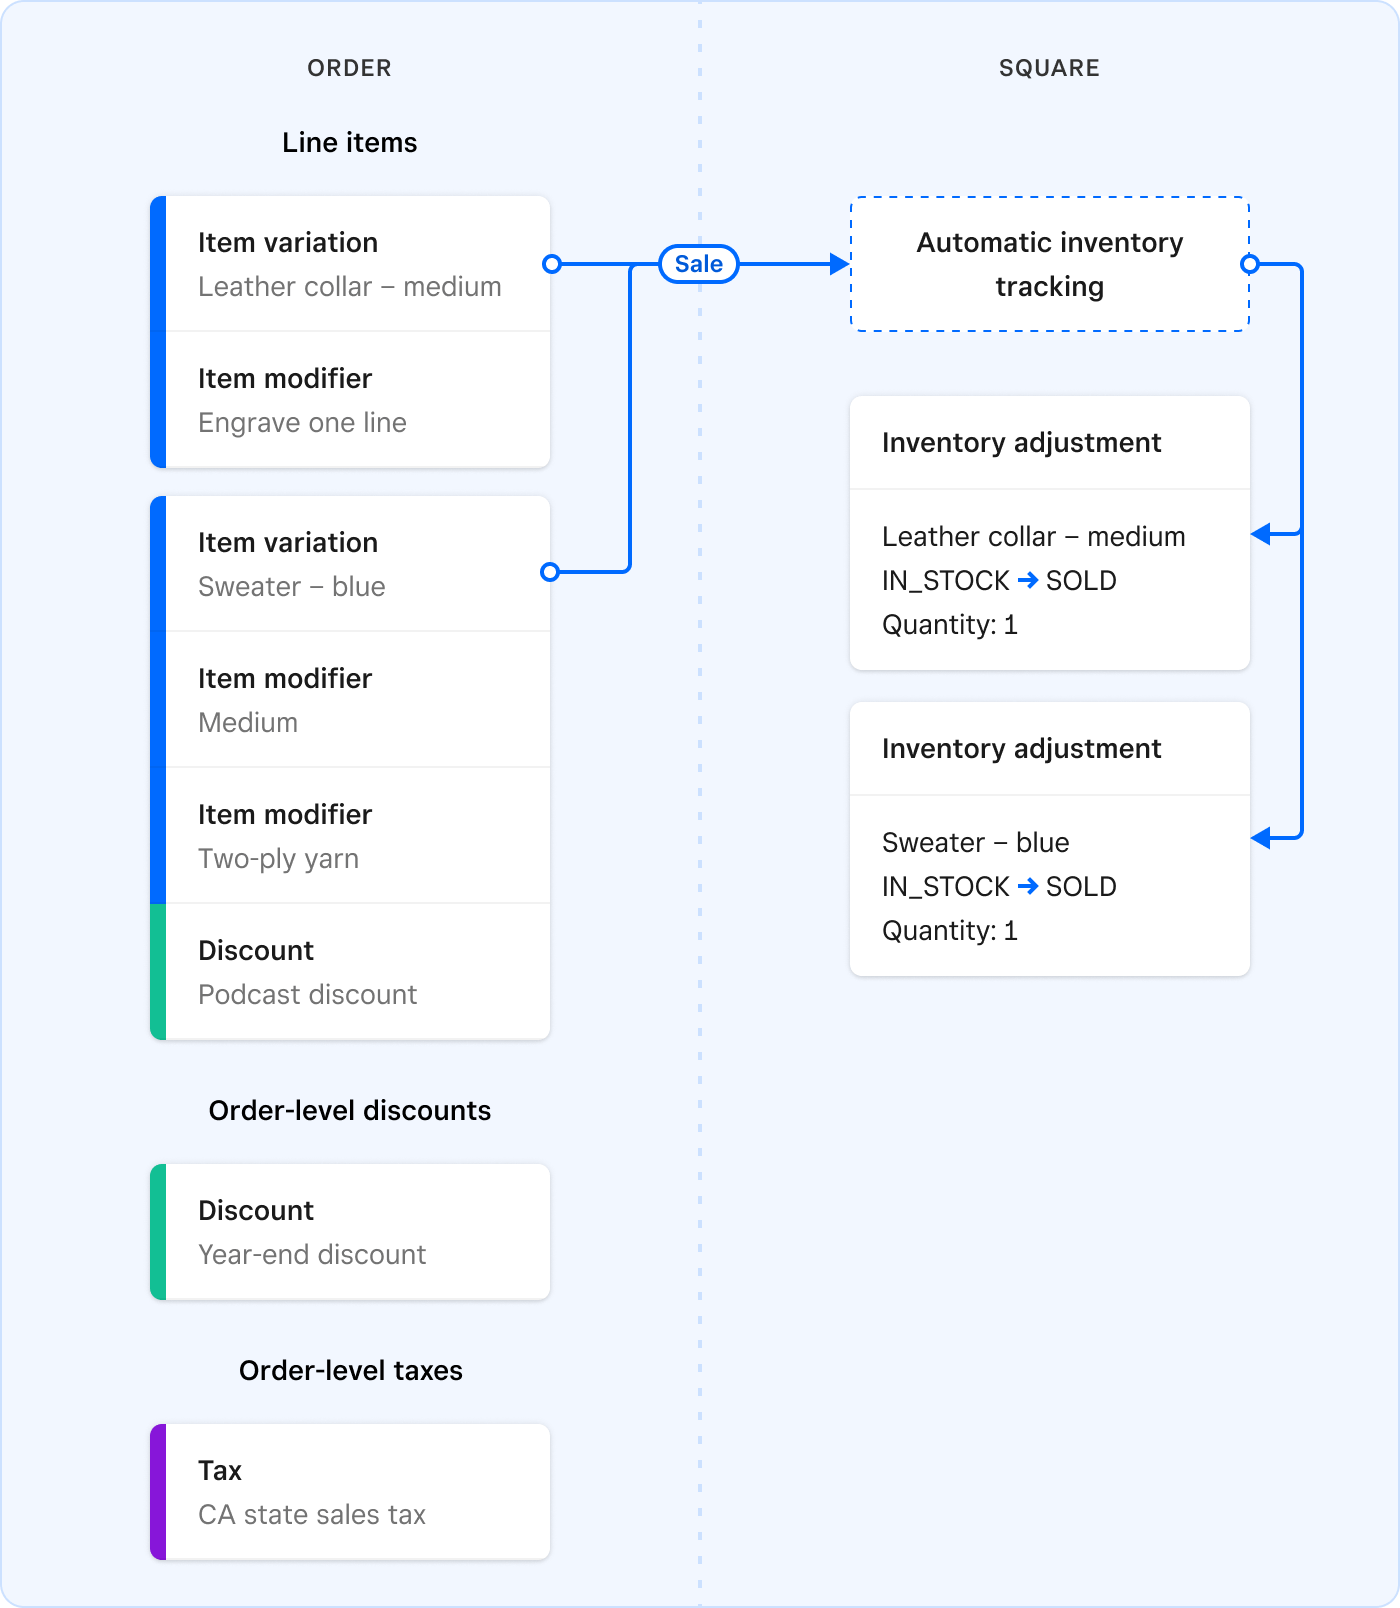 A diagram showing inventory state changes for inventory-tracked products.